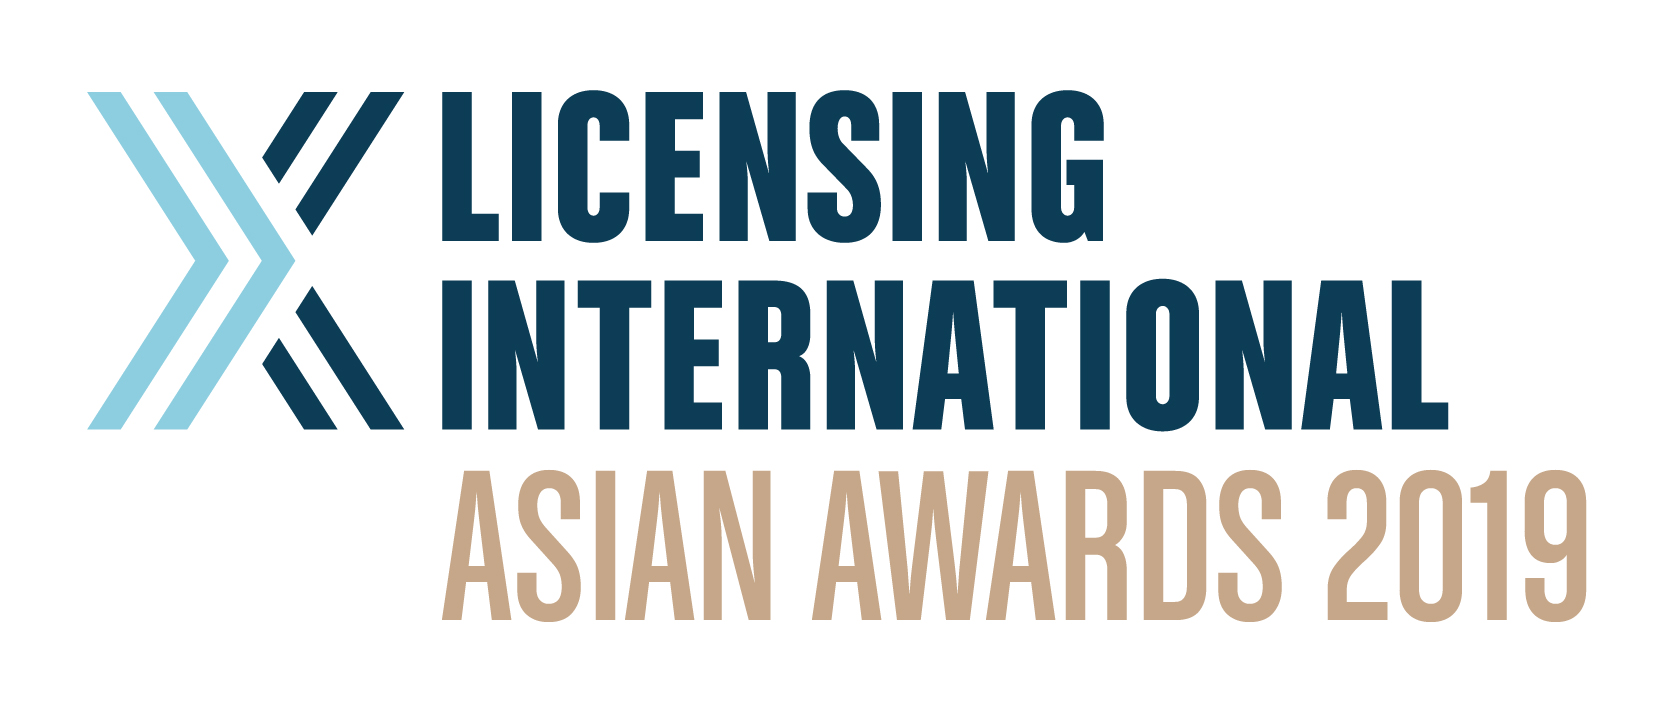 2019 Licensing International Asian Awards Nominees Announced image